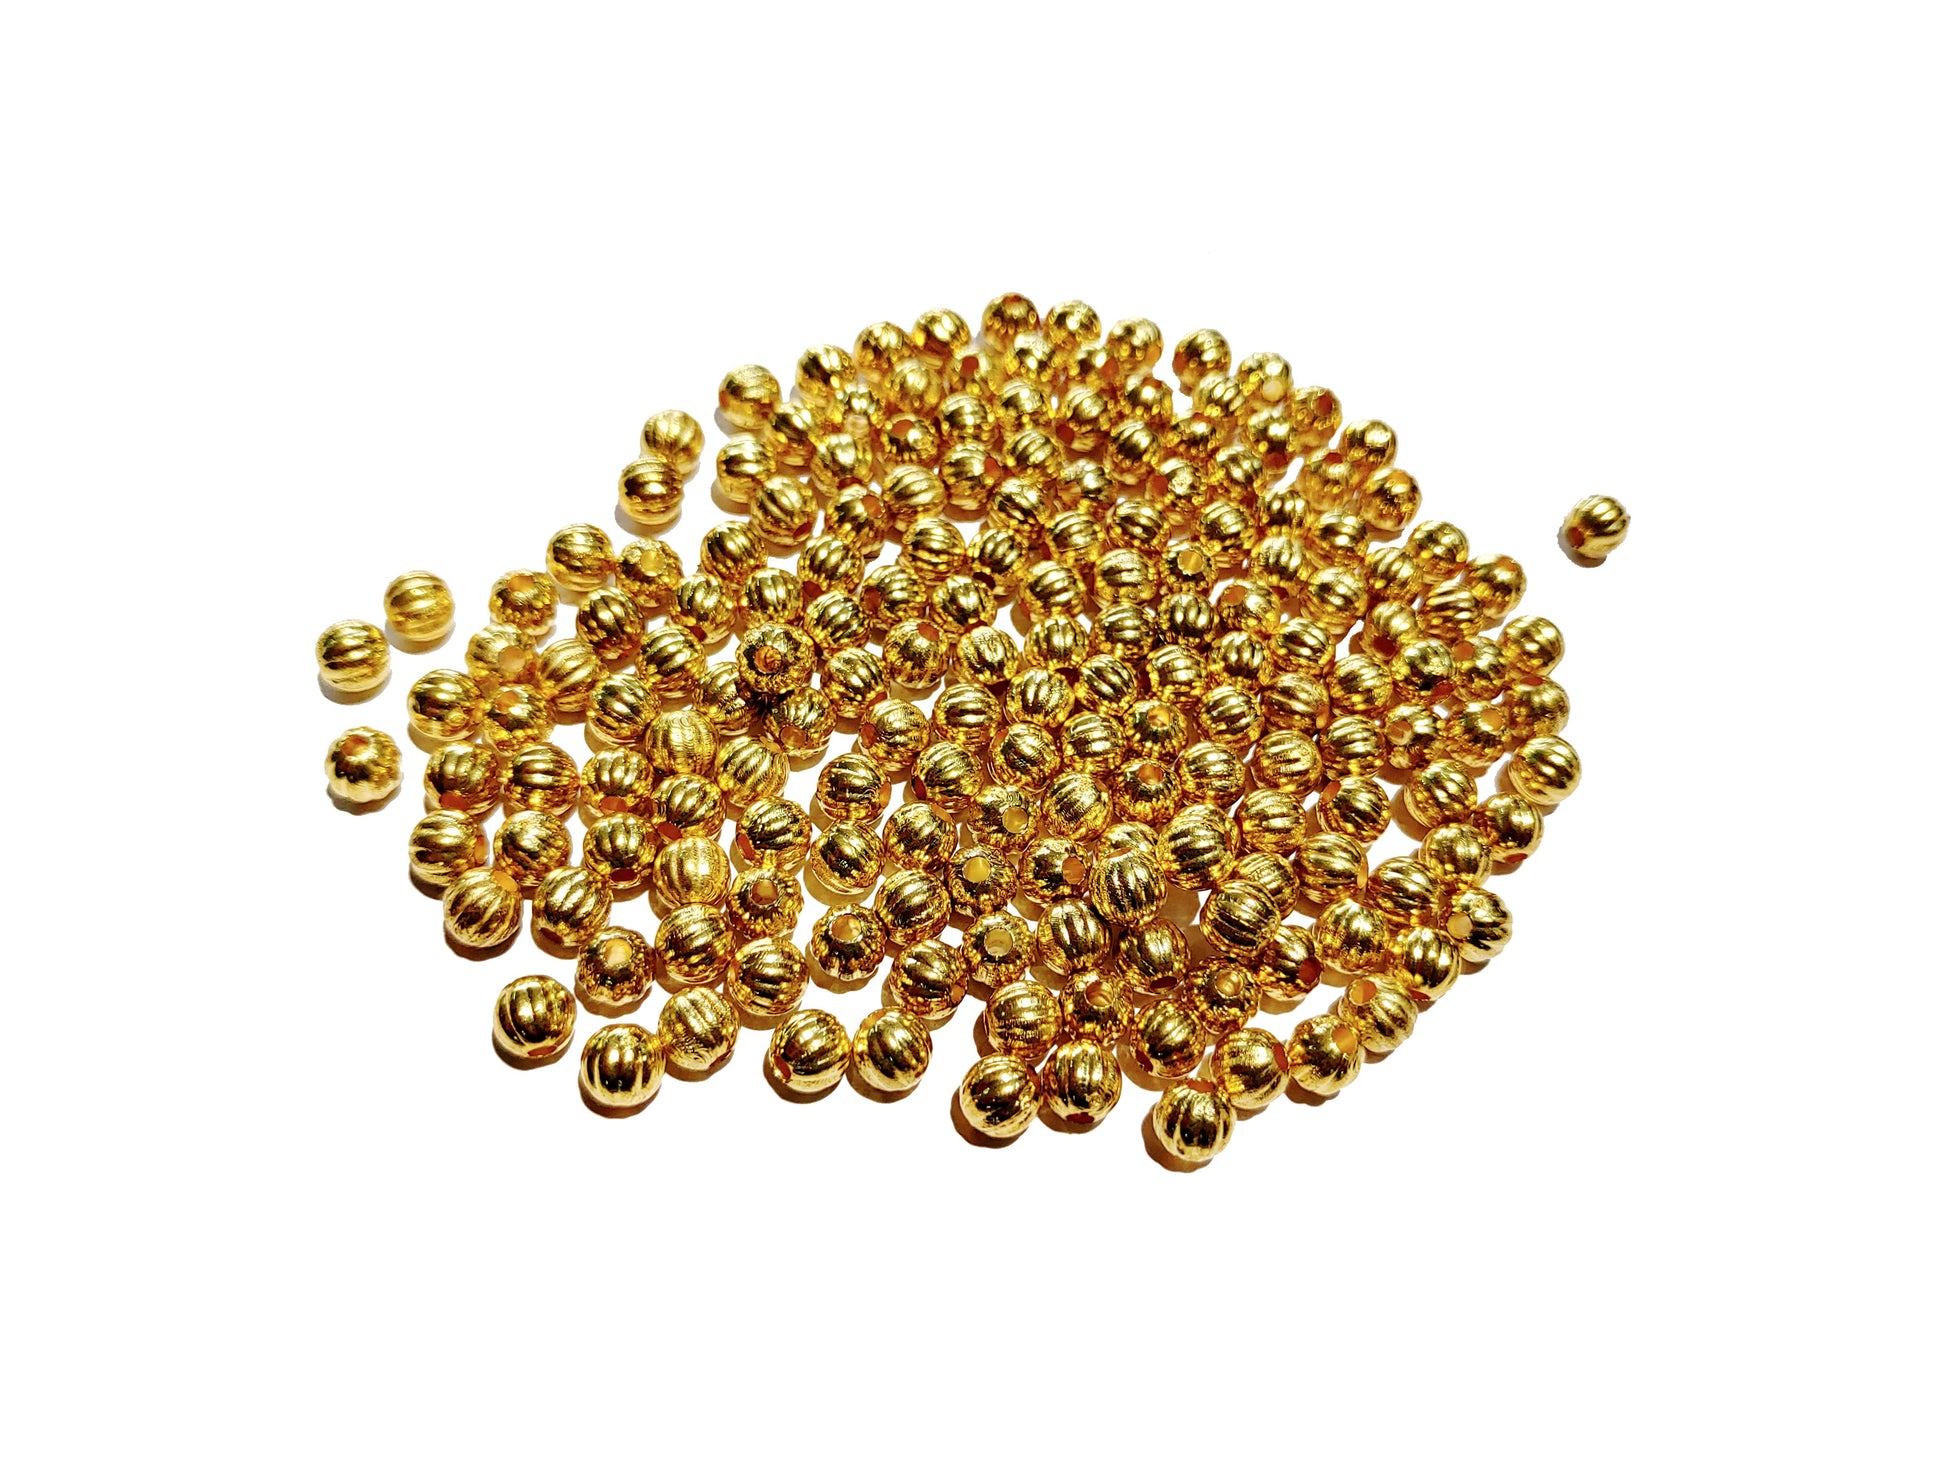 Indian Petals - Melon Shaped 6mm Sewable Golden Kharbuja Beads with Hole on both sides for Craft Decor or Jewelry Making